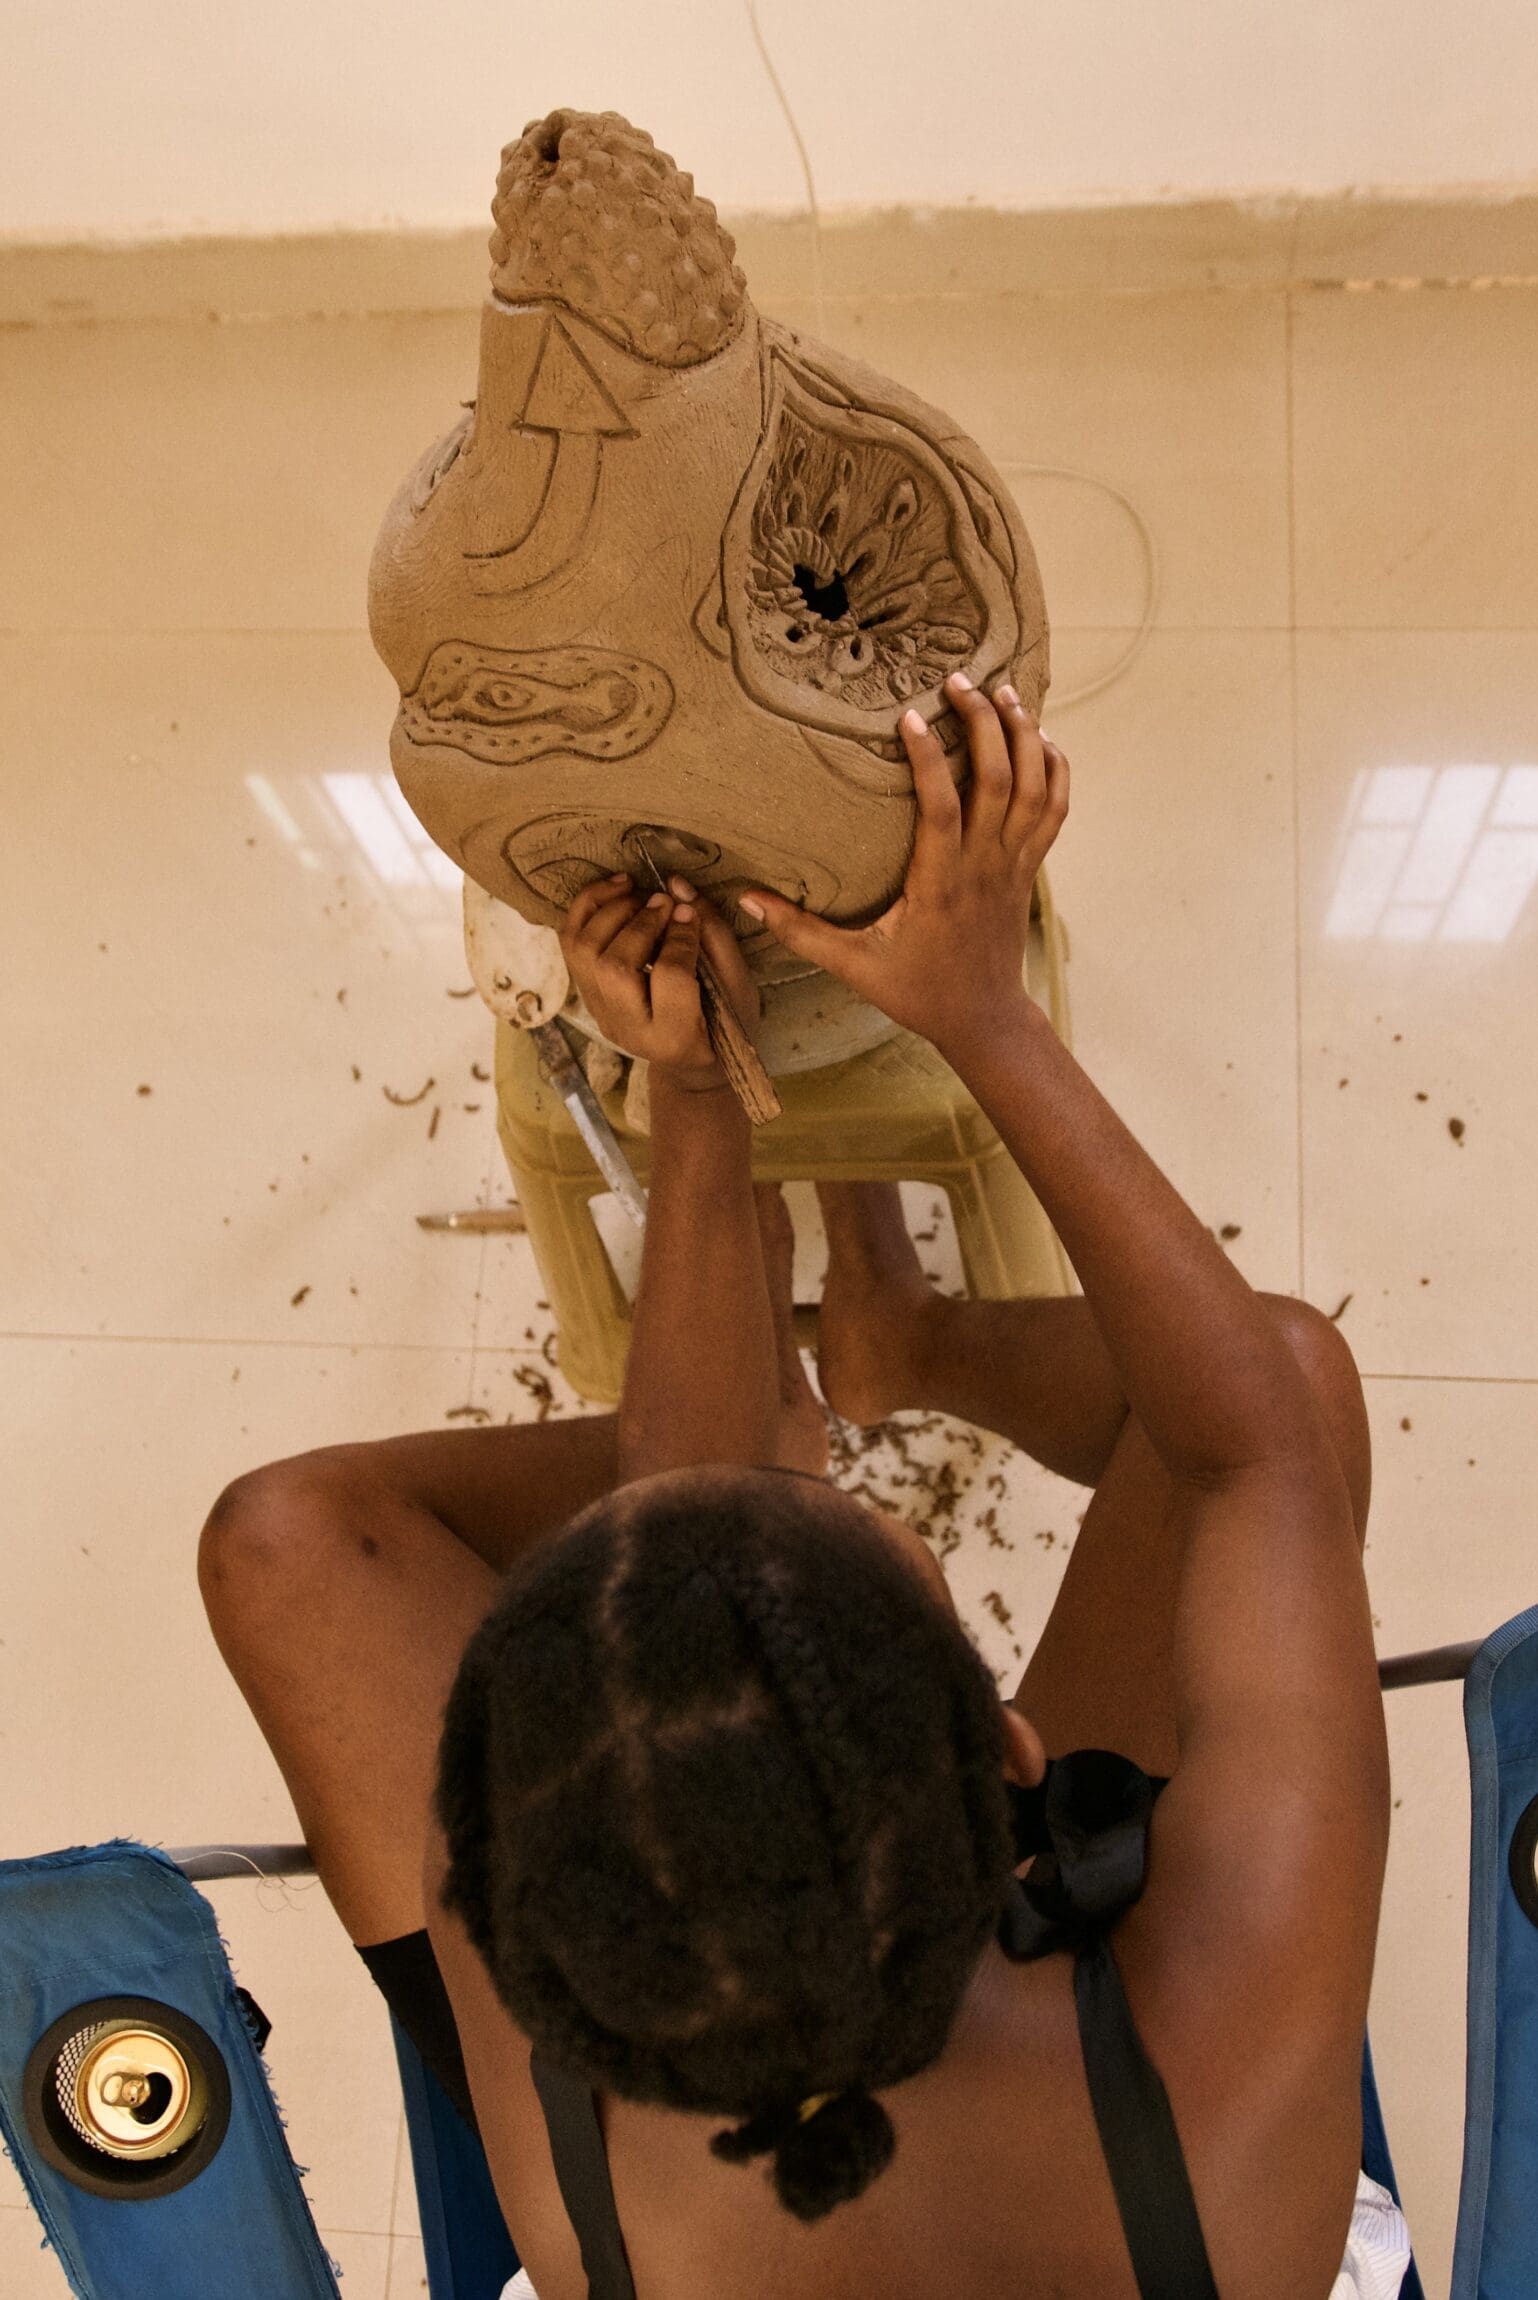 Four Lagos-based artists and designers on reinterpreting Nigerian craft | Olubunmi Atere working on a ceramic sculpture.